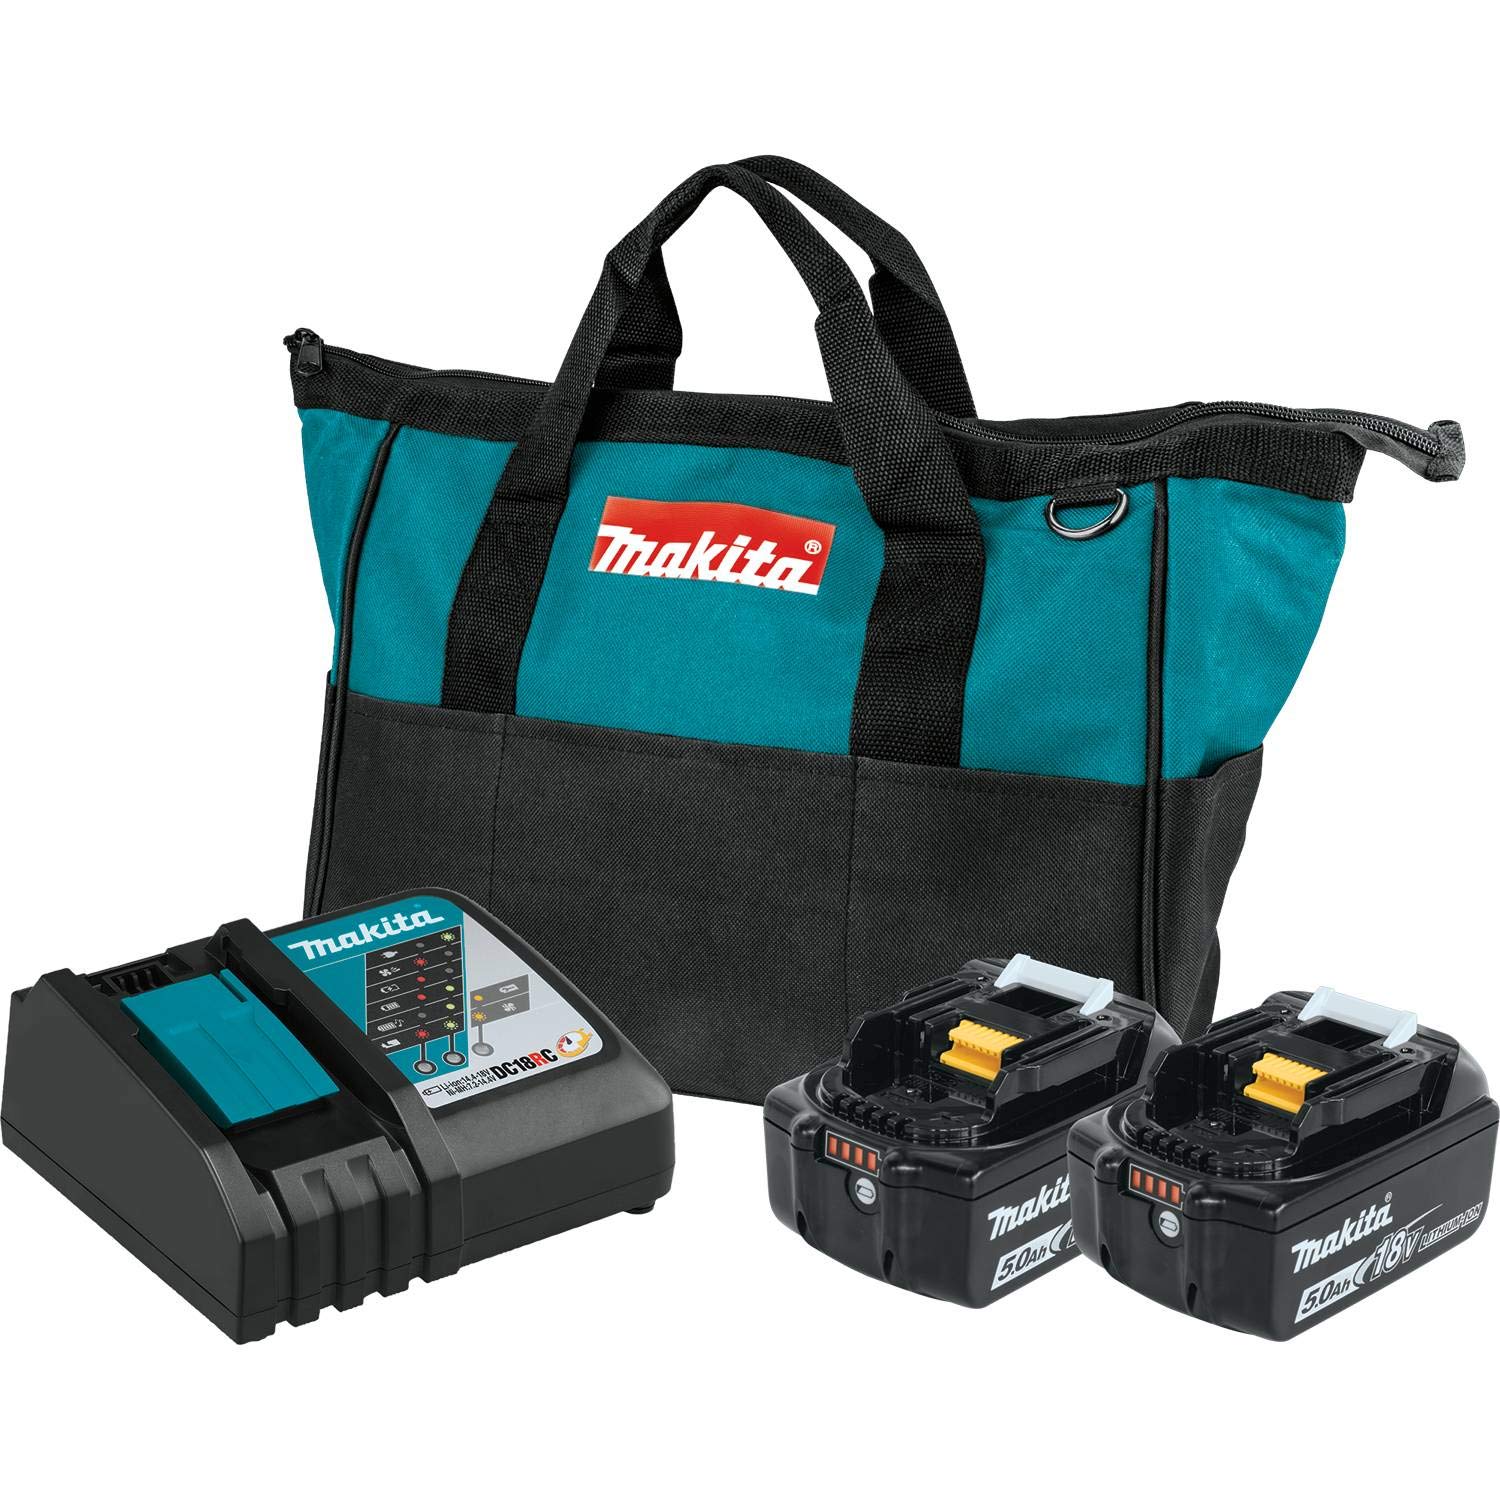 Makita BL1850BDC2 18V LXT Lithium-Ion Battery and Rapid Optimum Charger Starter Pack 5.0Ah並行輸入品